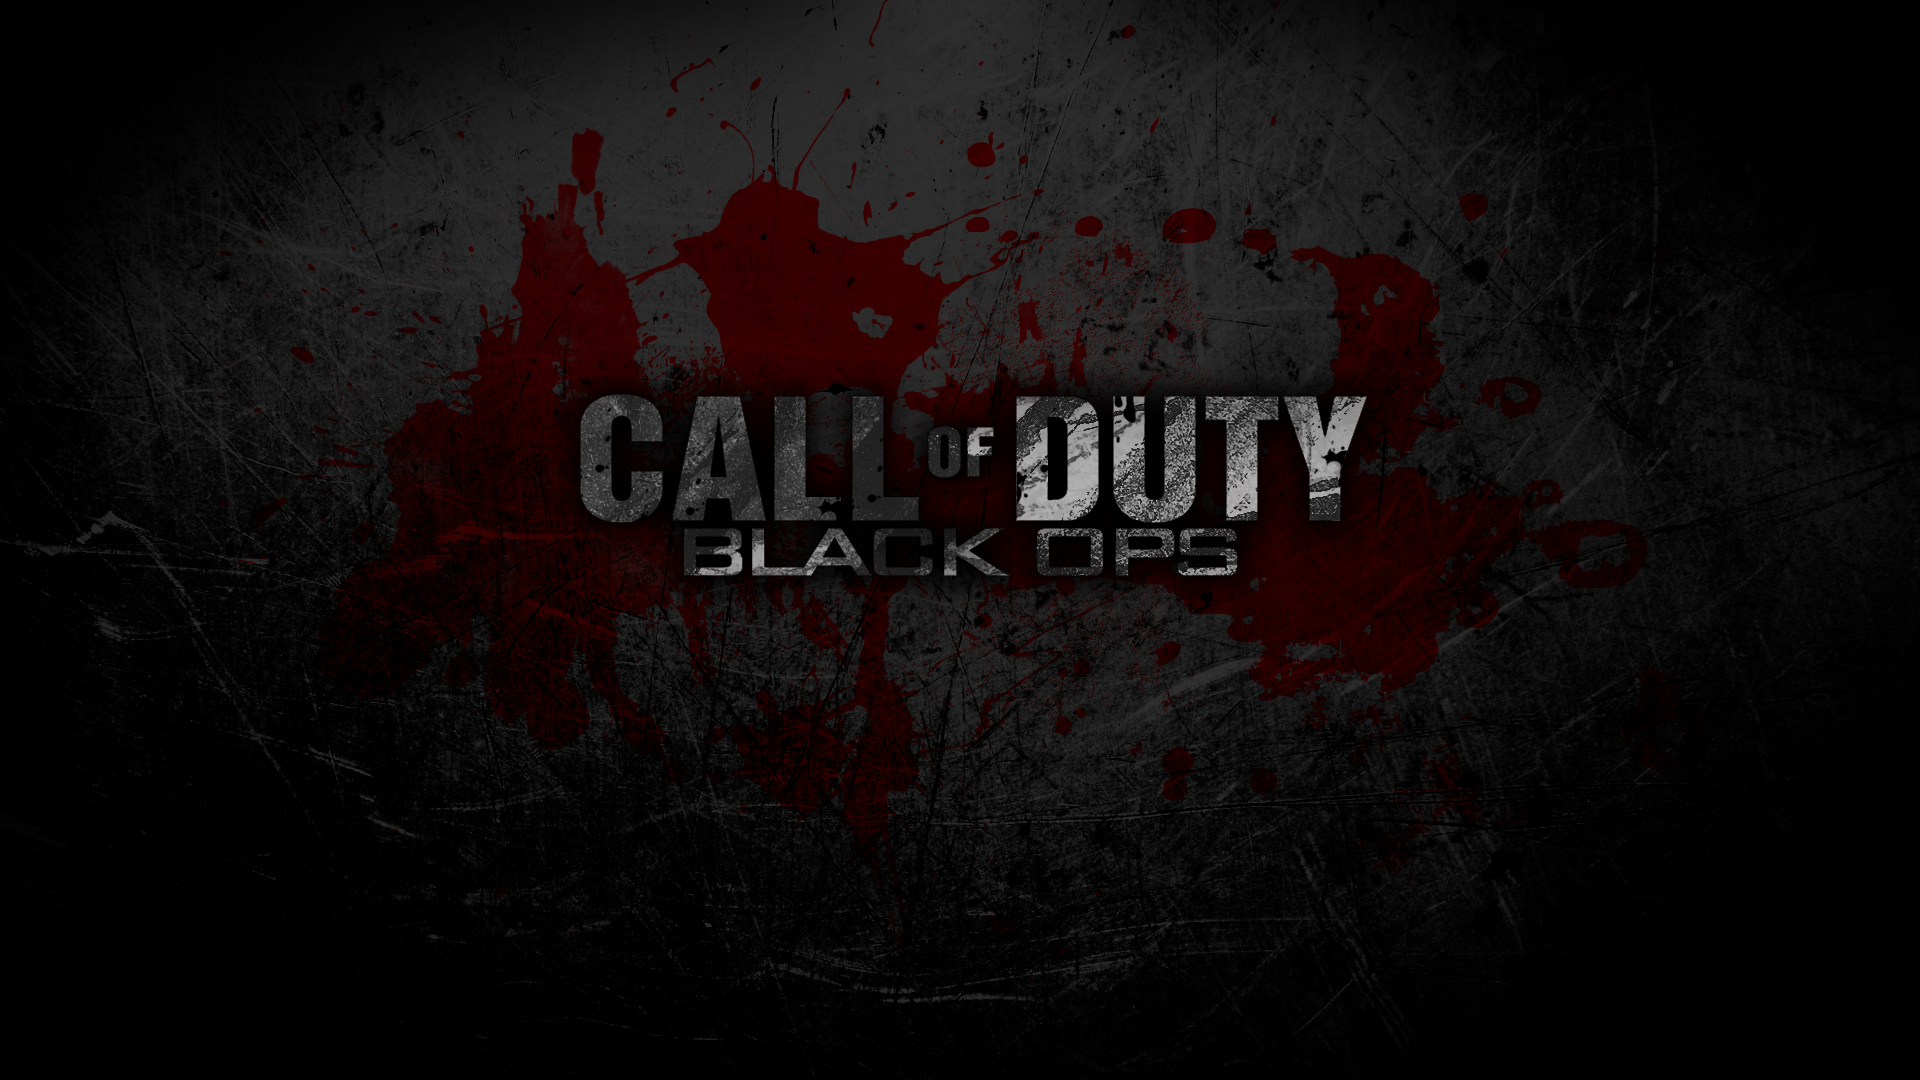 Call Of Duty Black Ops wallpaper   237463